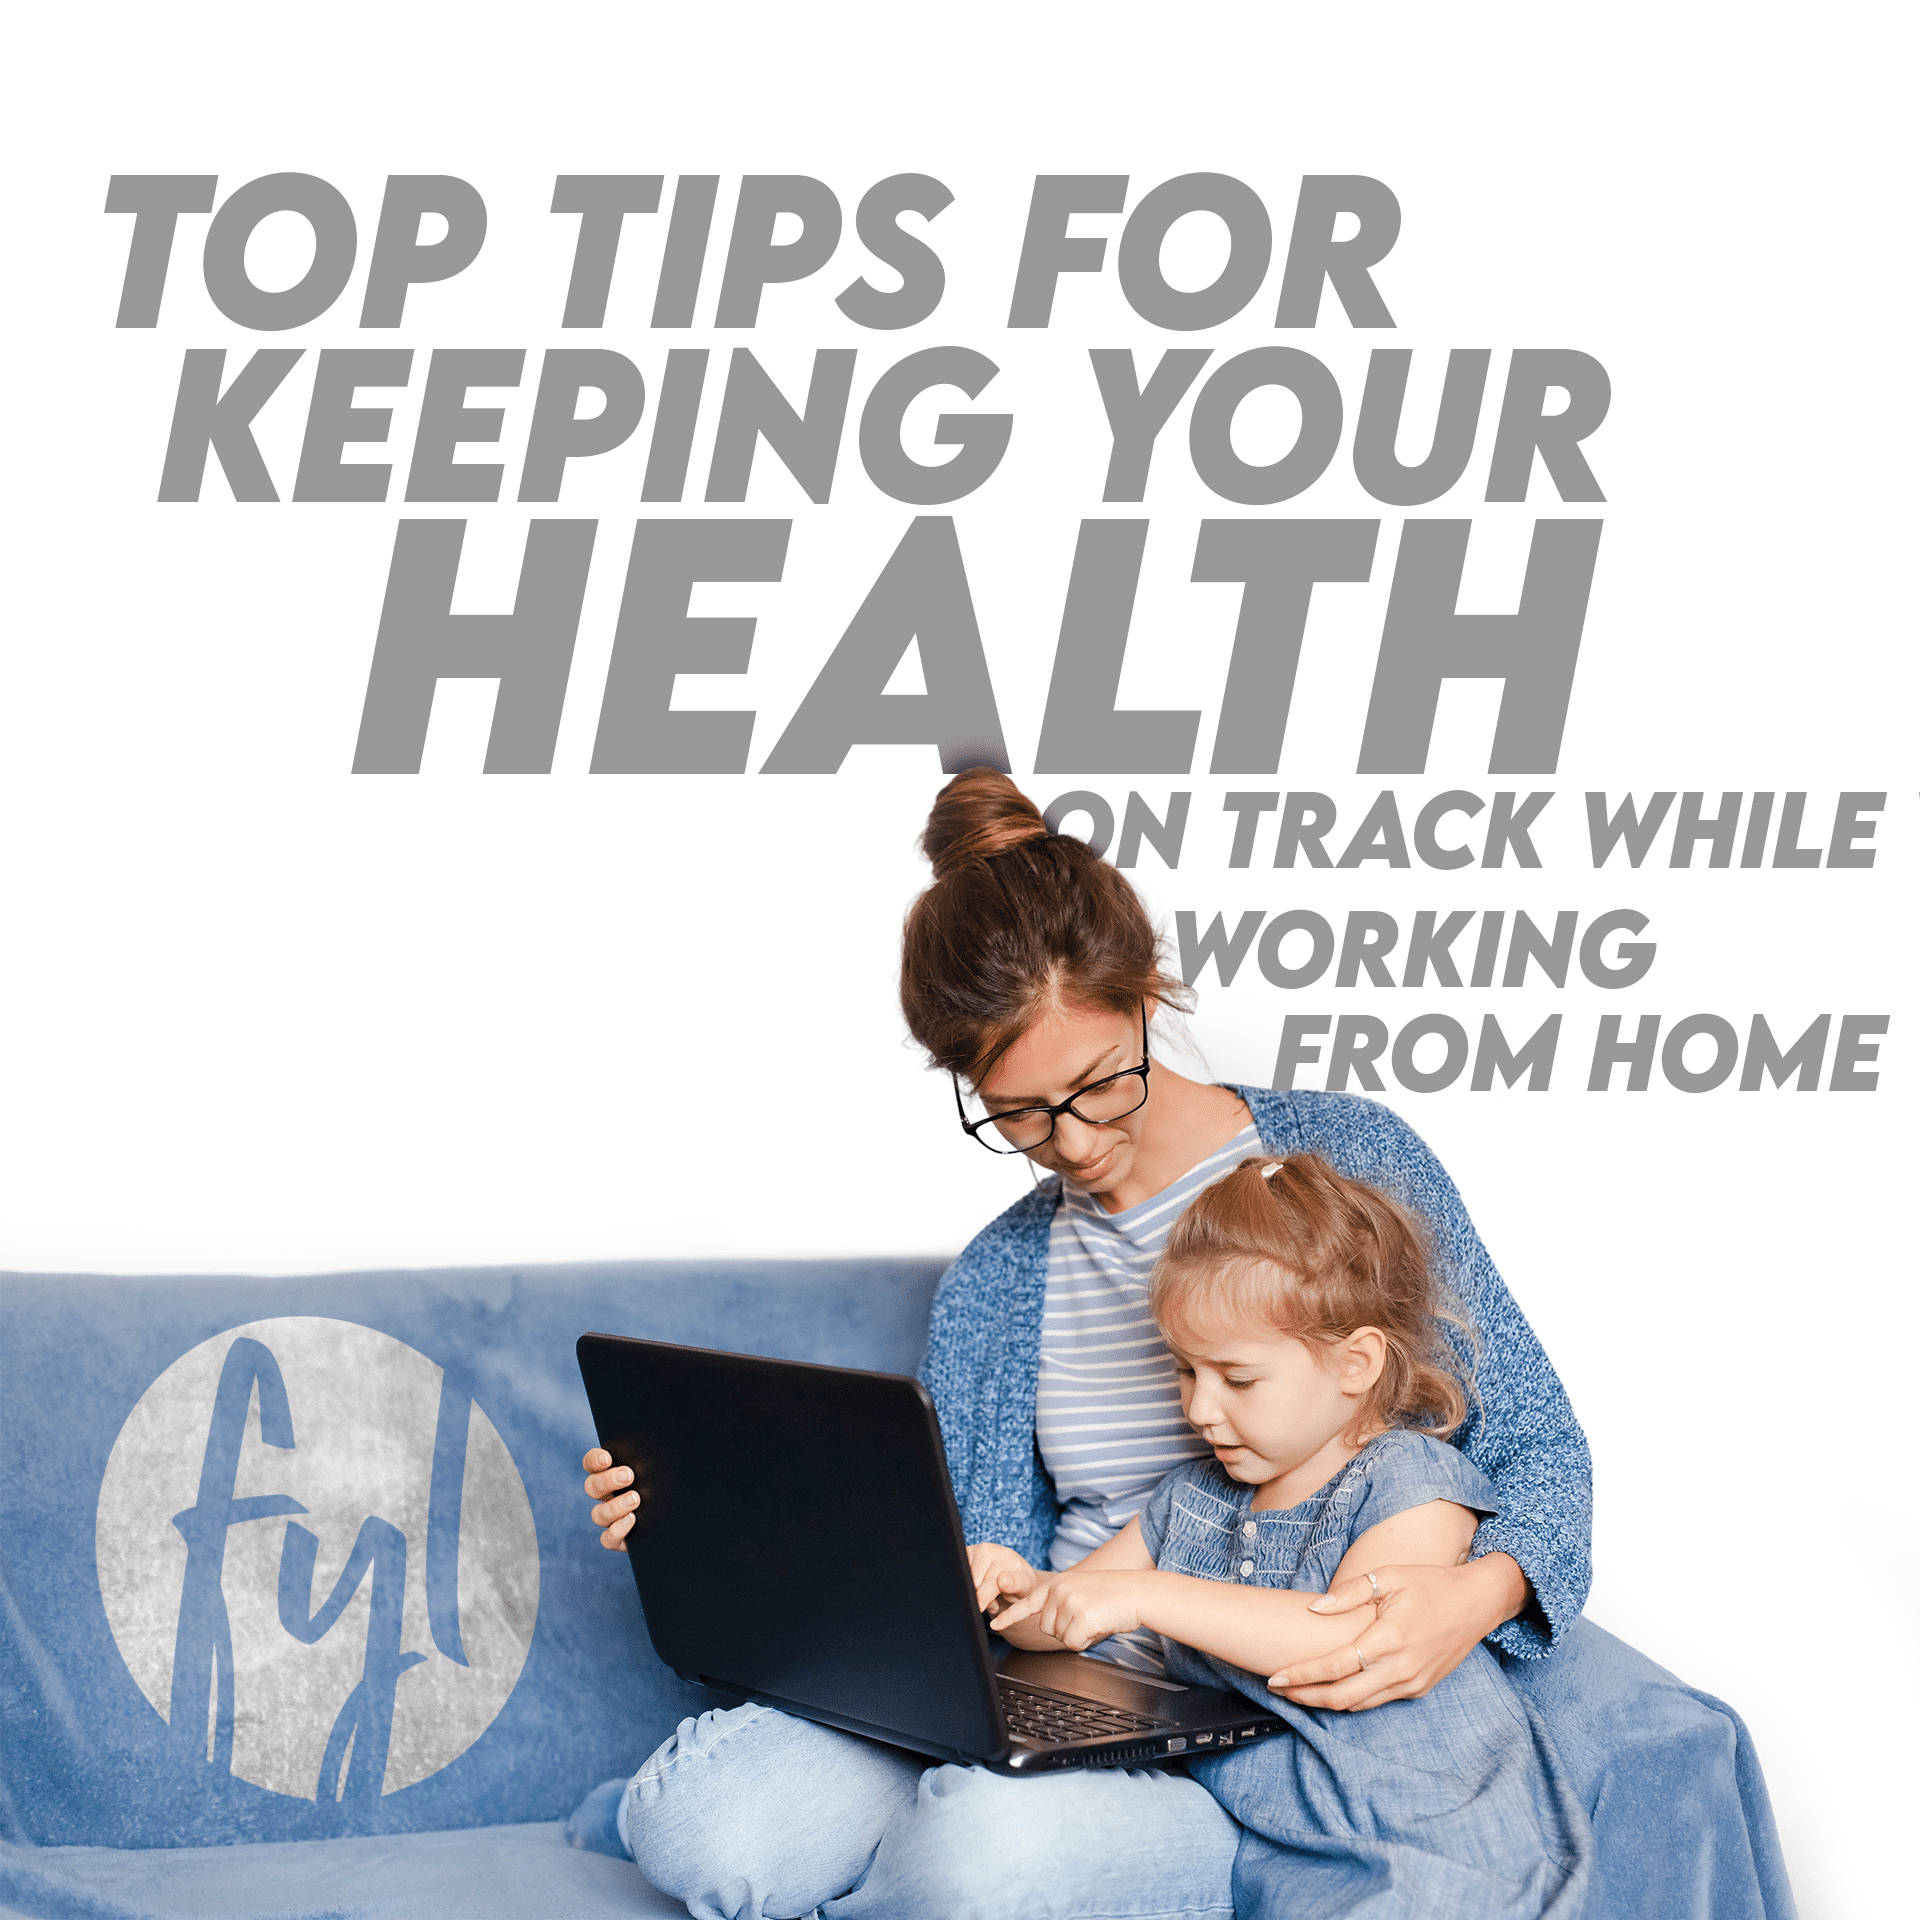 Top Tips for Keeping Your Health on Track While Working from Home